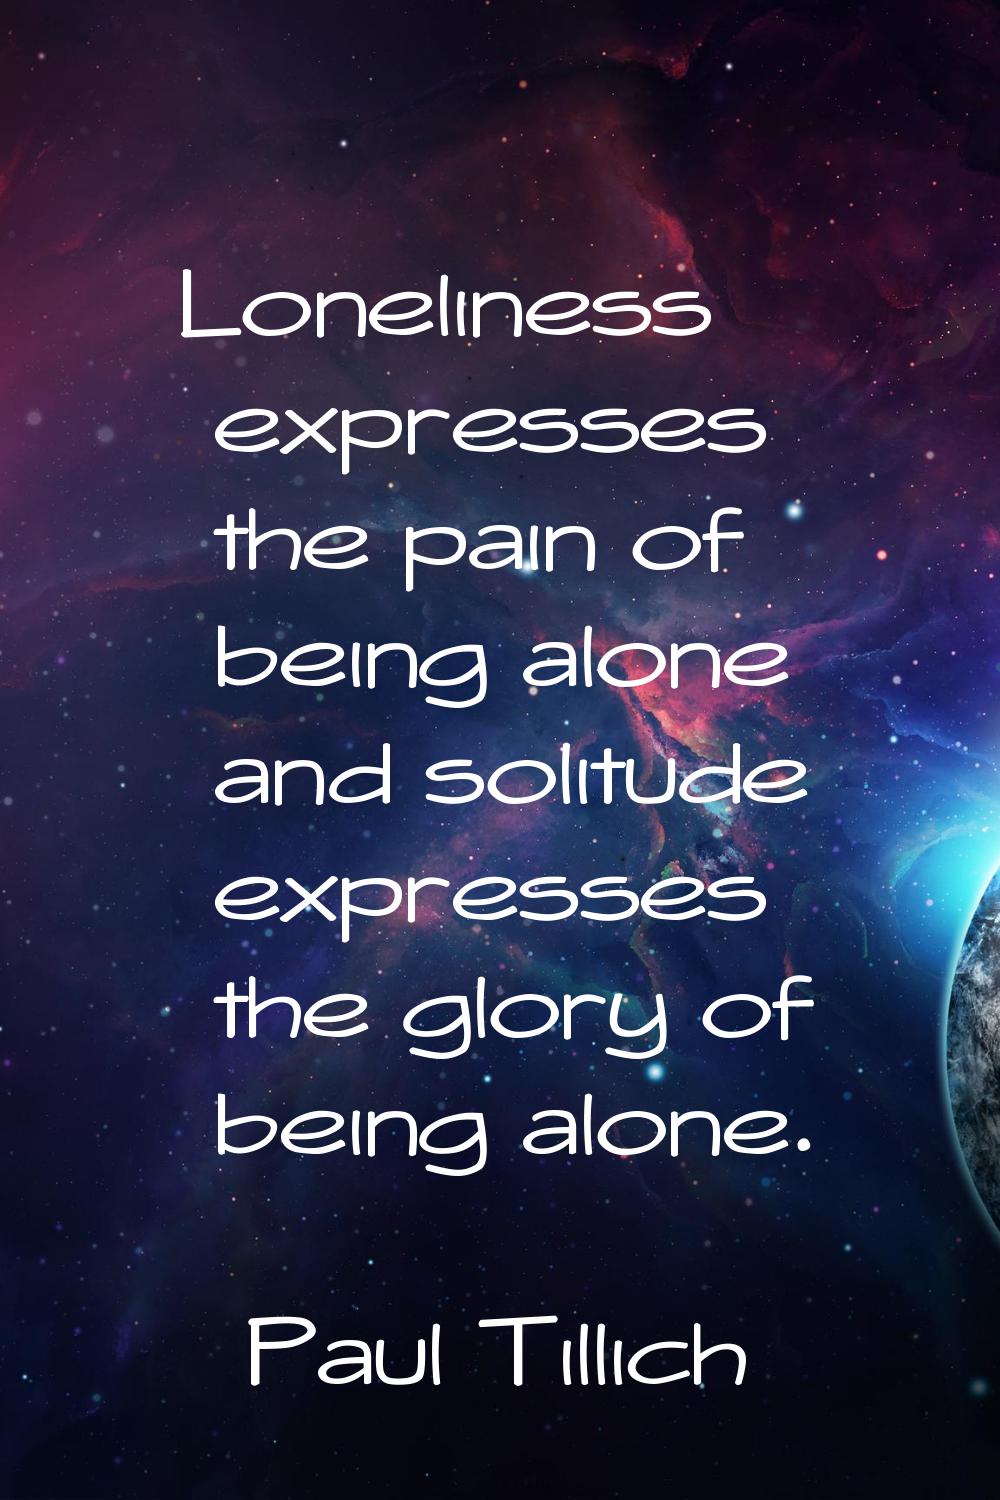 Loneliness expresses the pain of being alone and solitude expresses the glory of being alone.